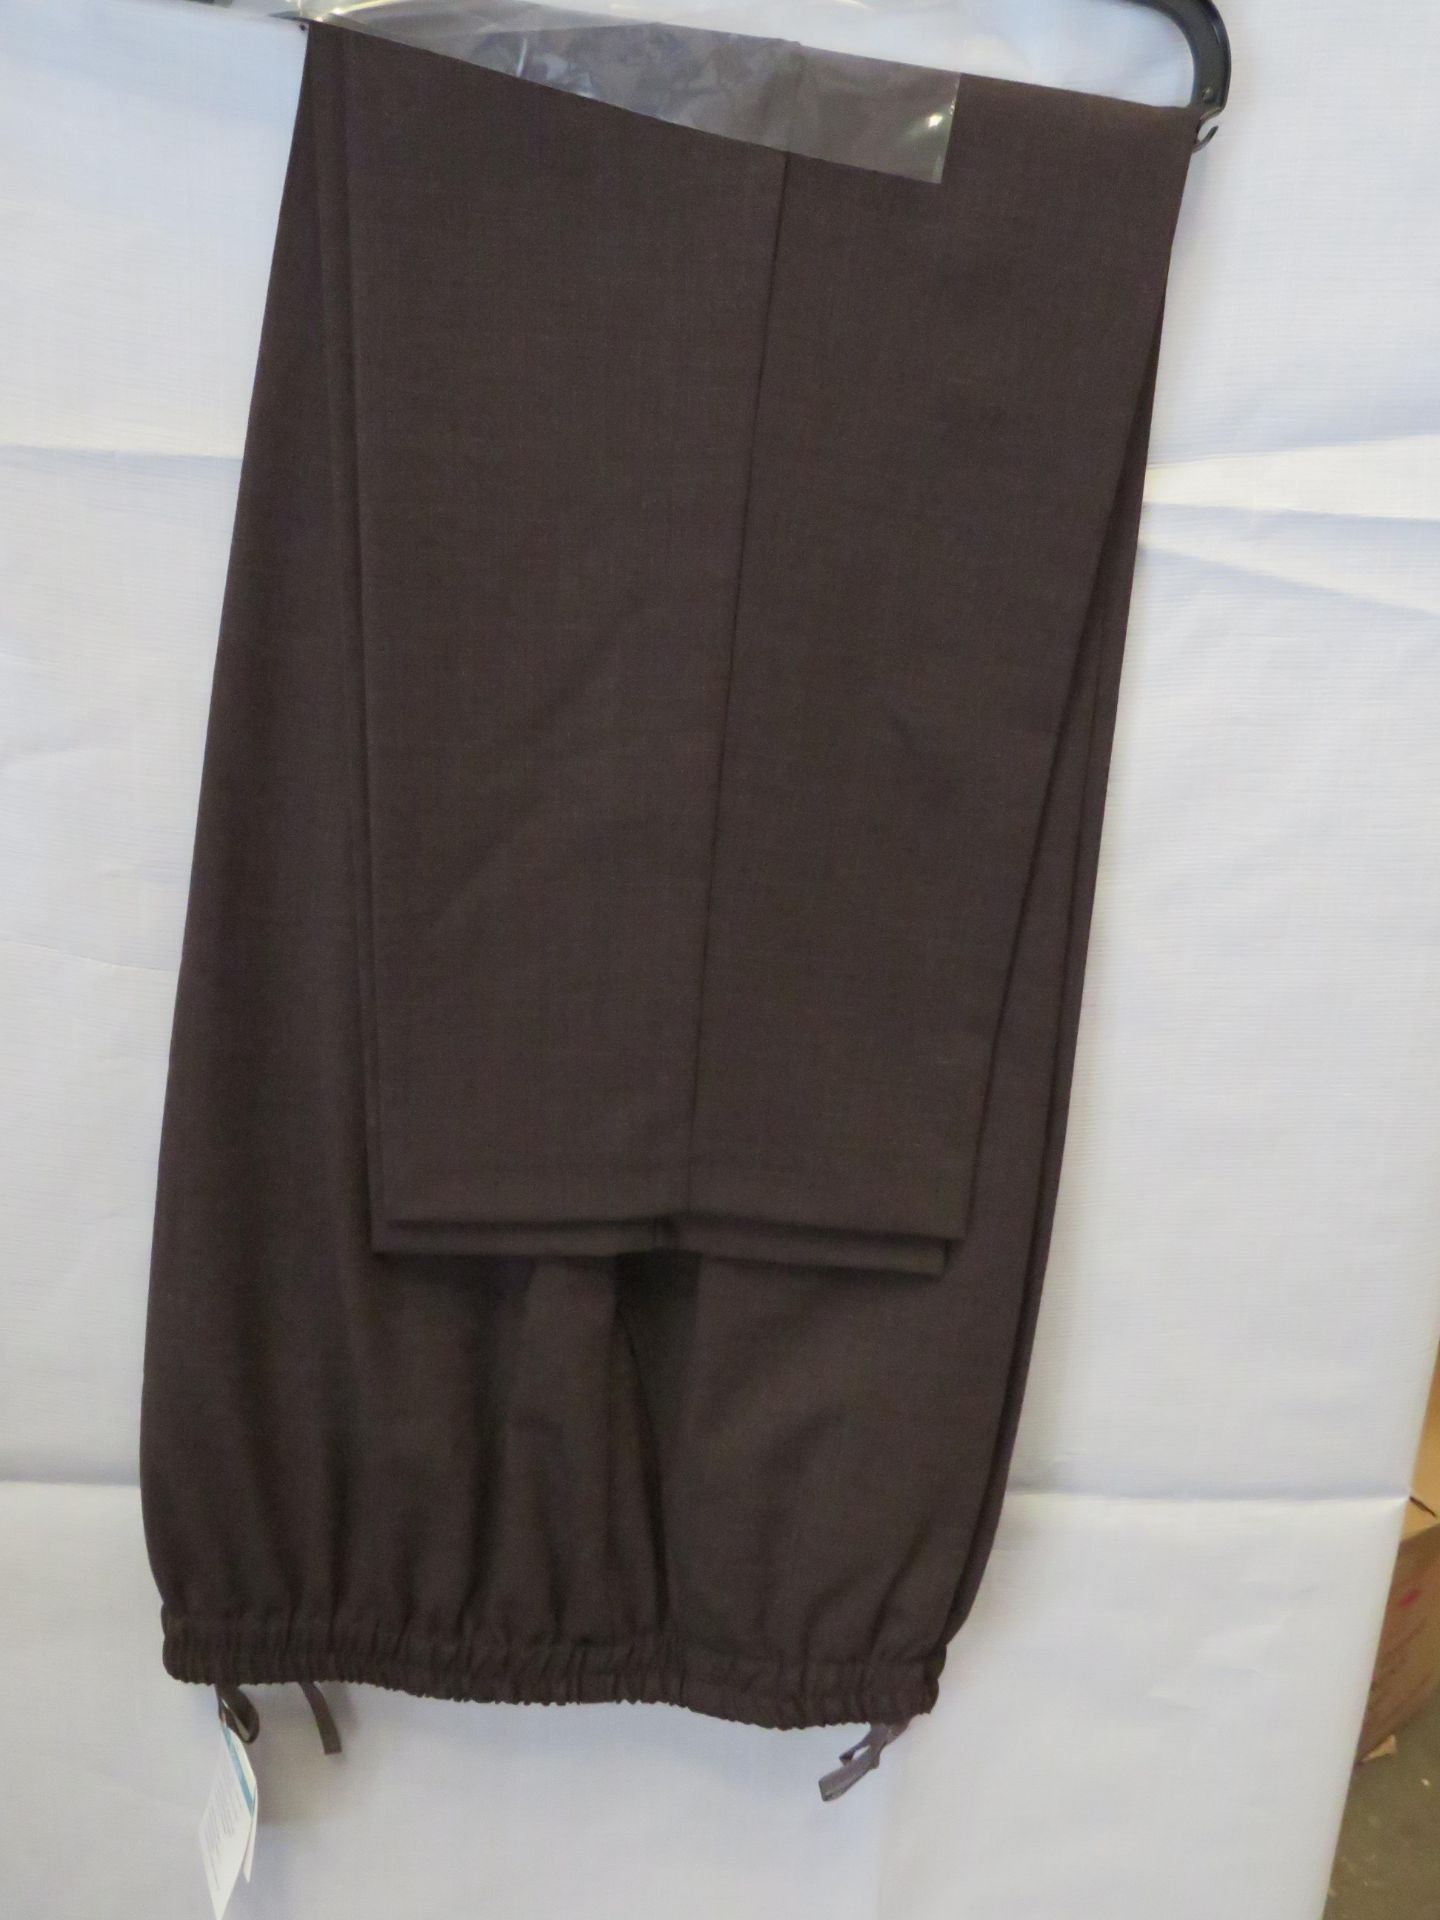 Unbranded Pants Brown Size 22XP new